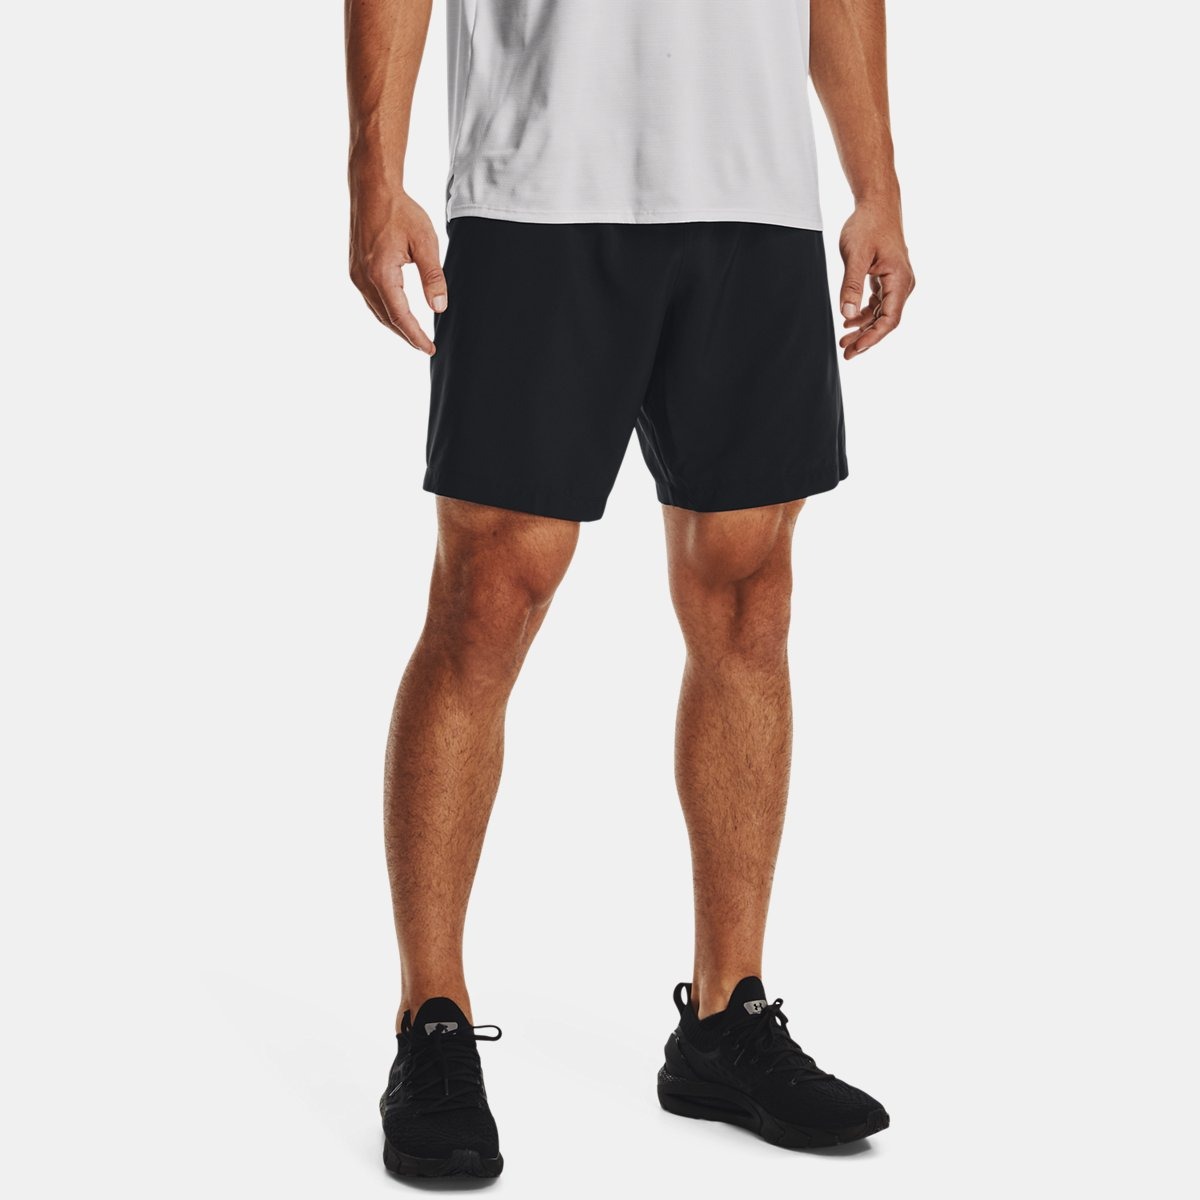 Mens Shorts in Black at Under Armour GOOFASH